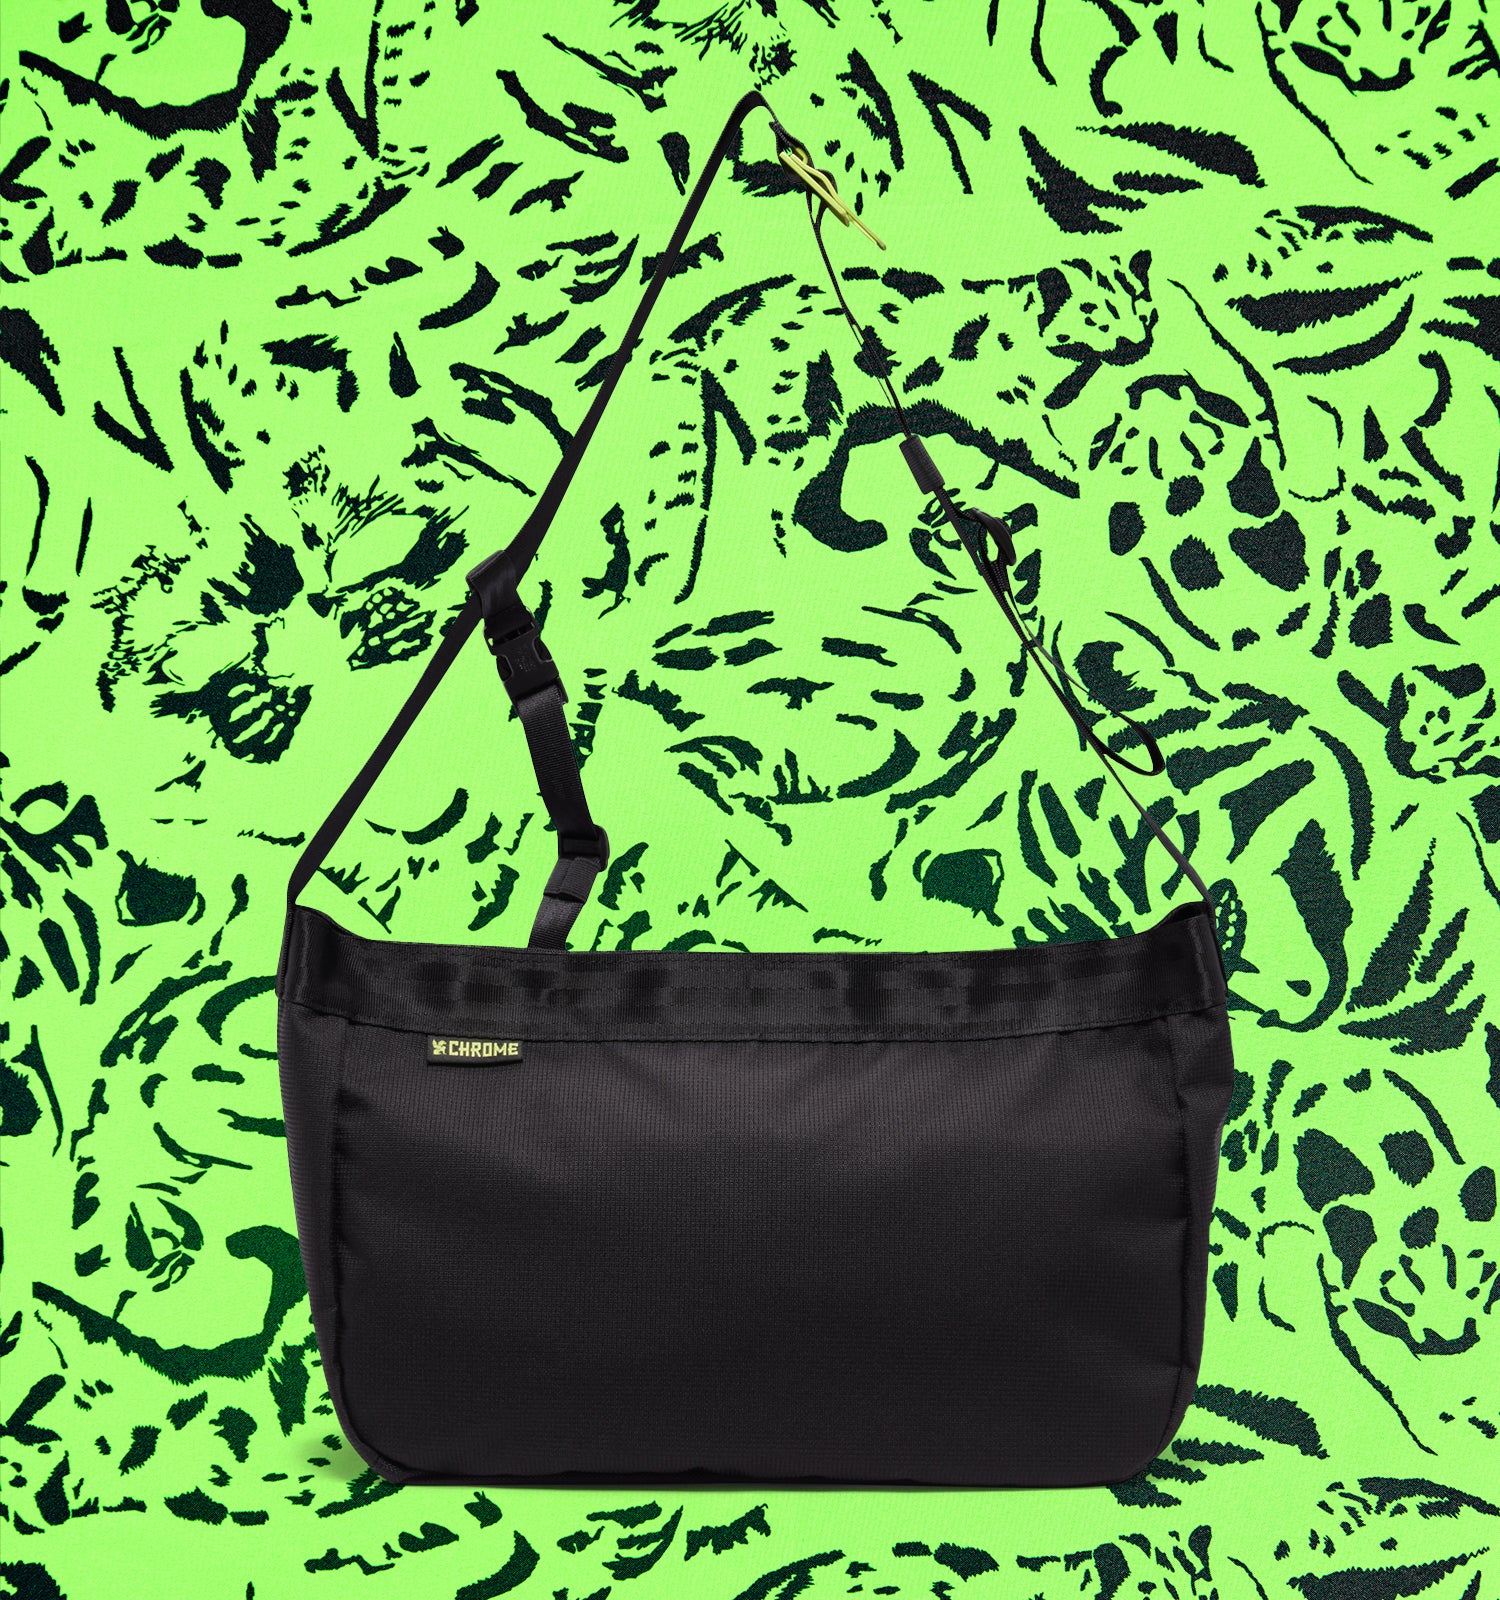 Ruckas messenger collab with Chrome x ALC in black with green